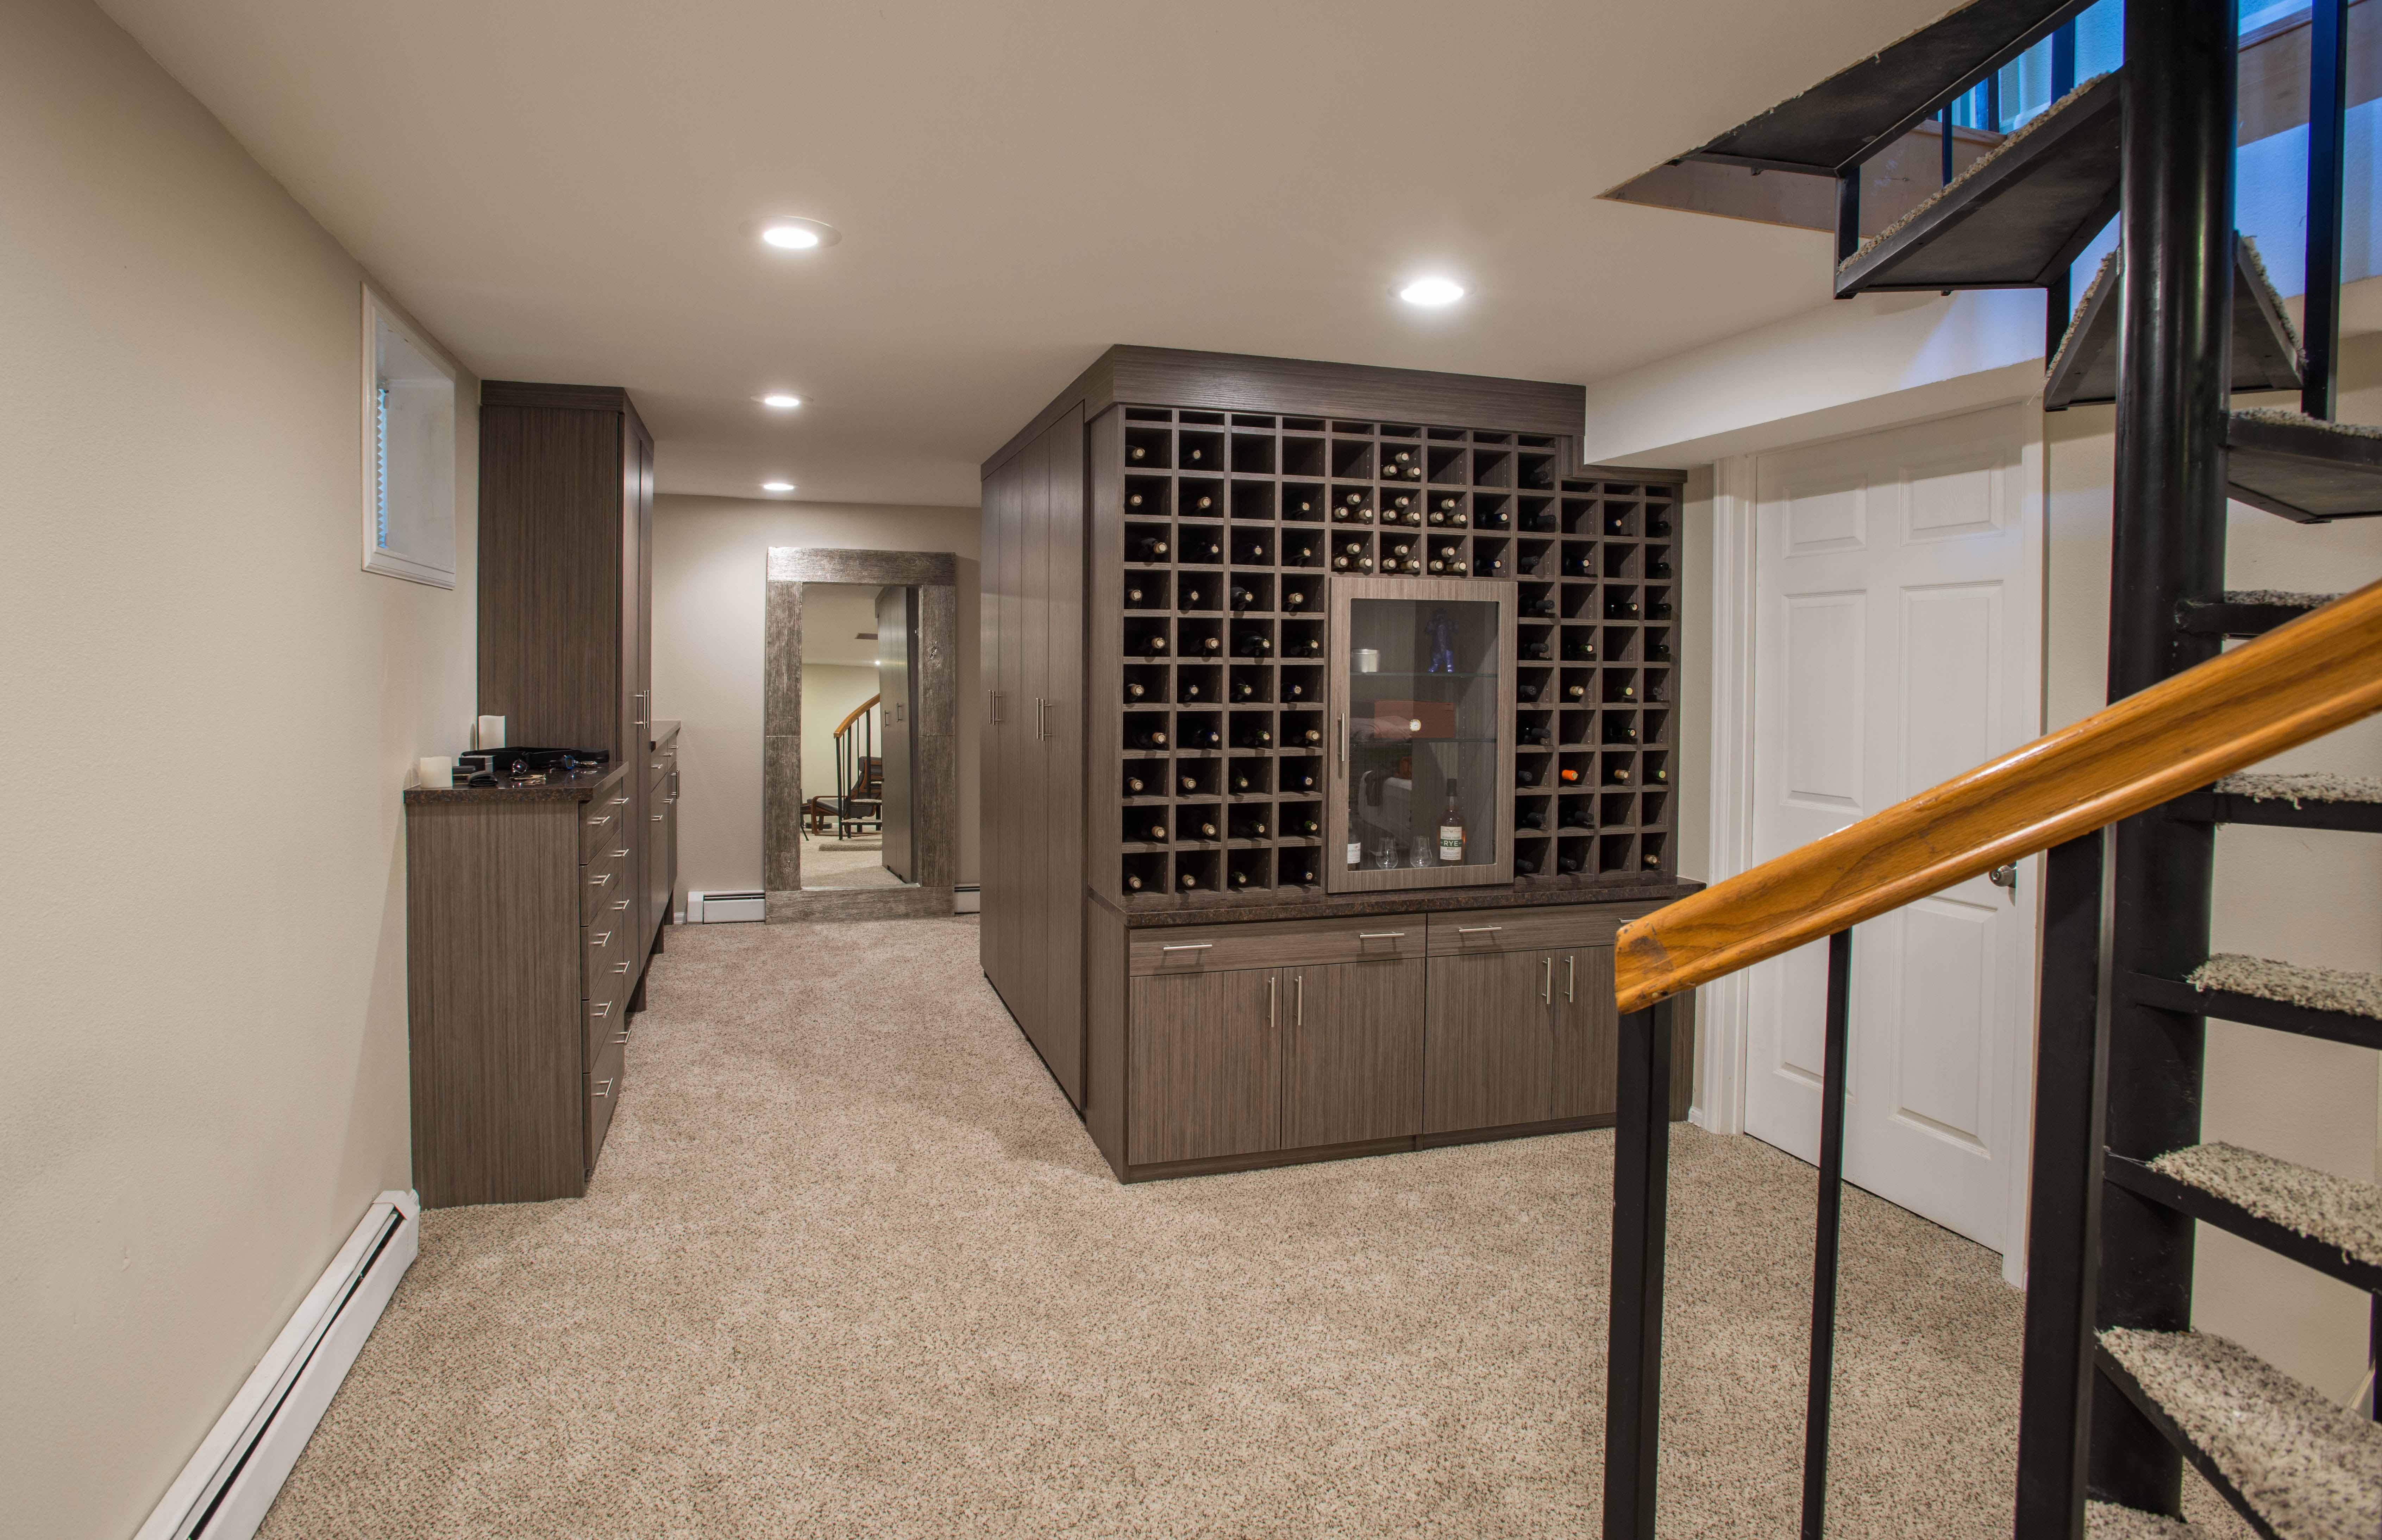 Basement converted into a wine storage room.